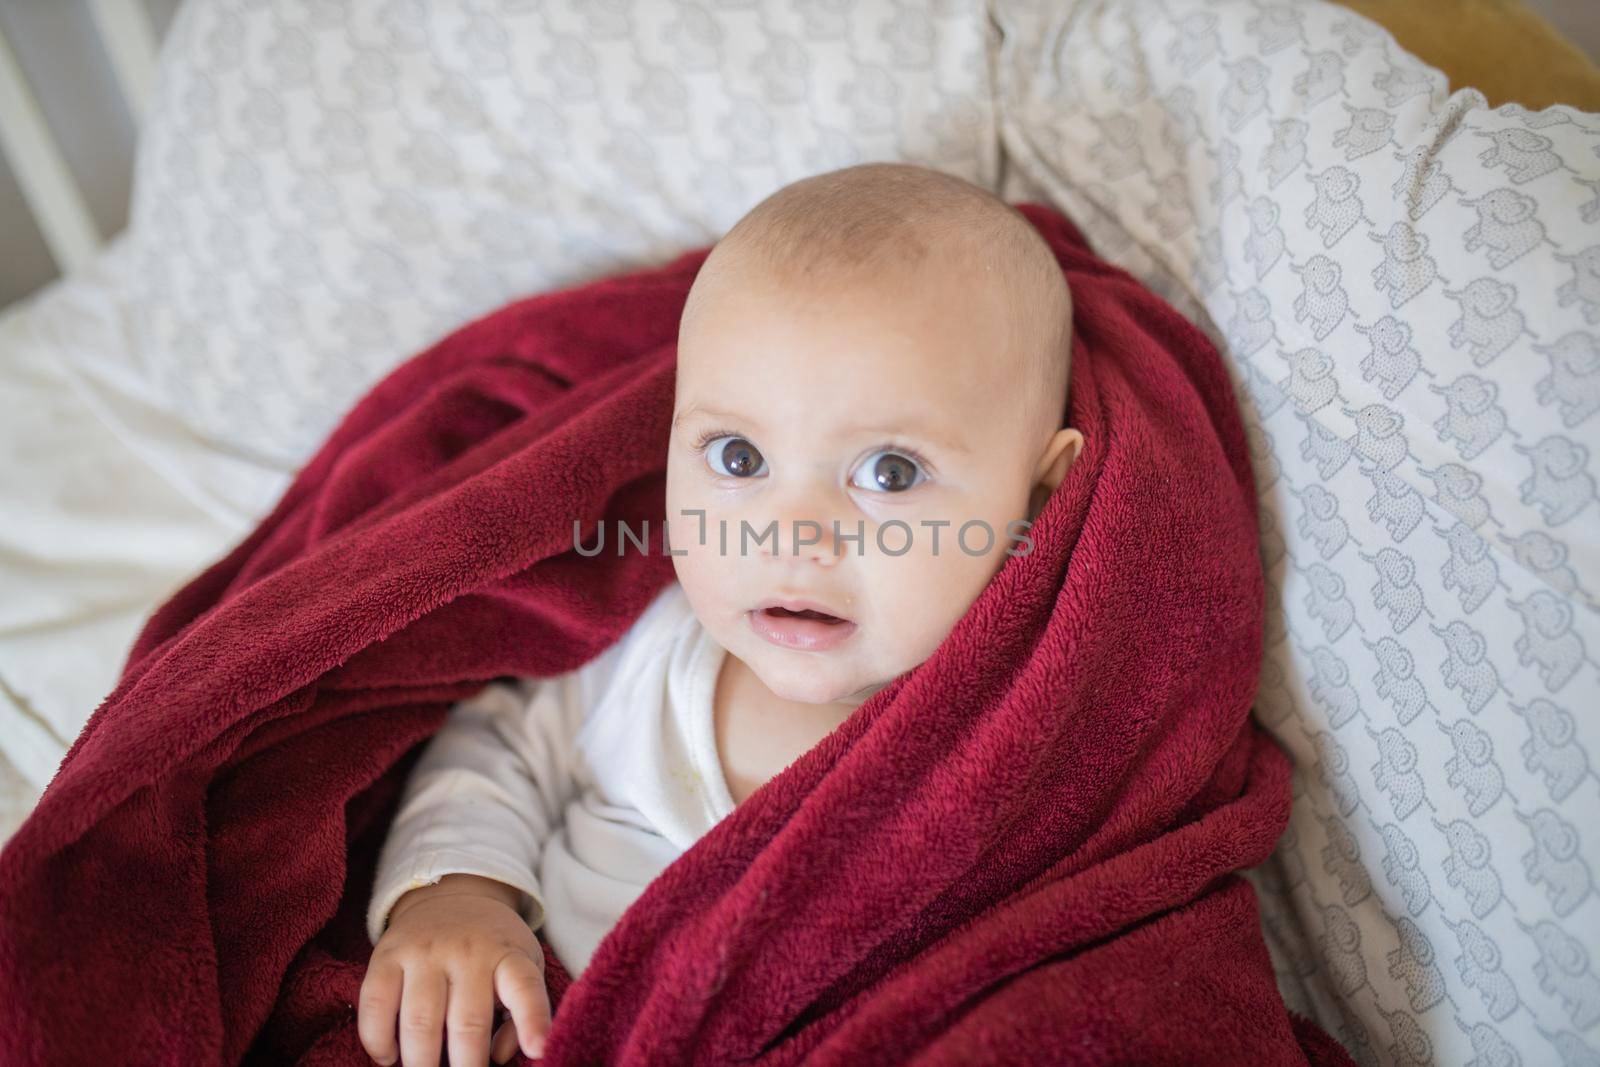 Concerned-looking baby covered with a red blanket and lying on a bed by Kanelbulle